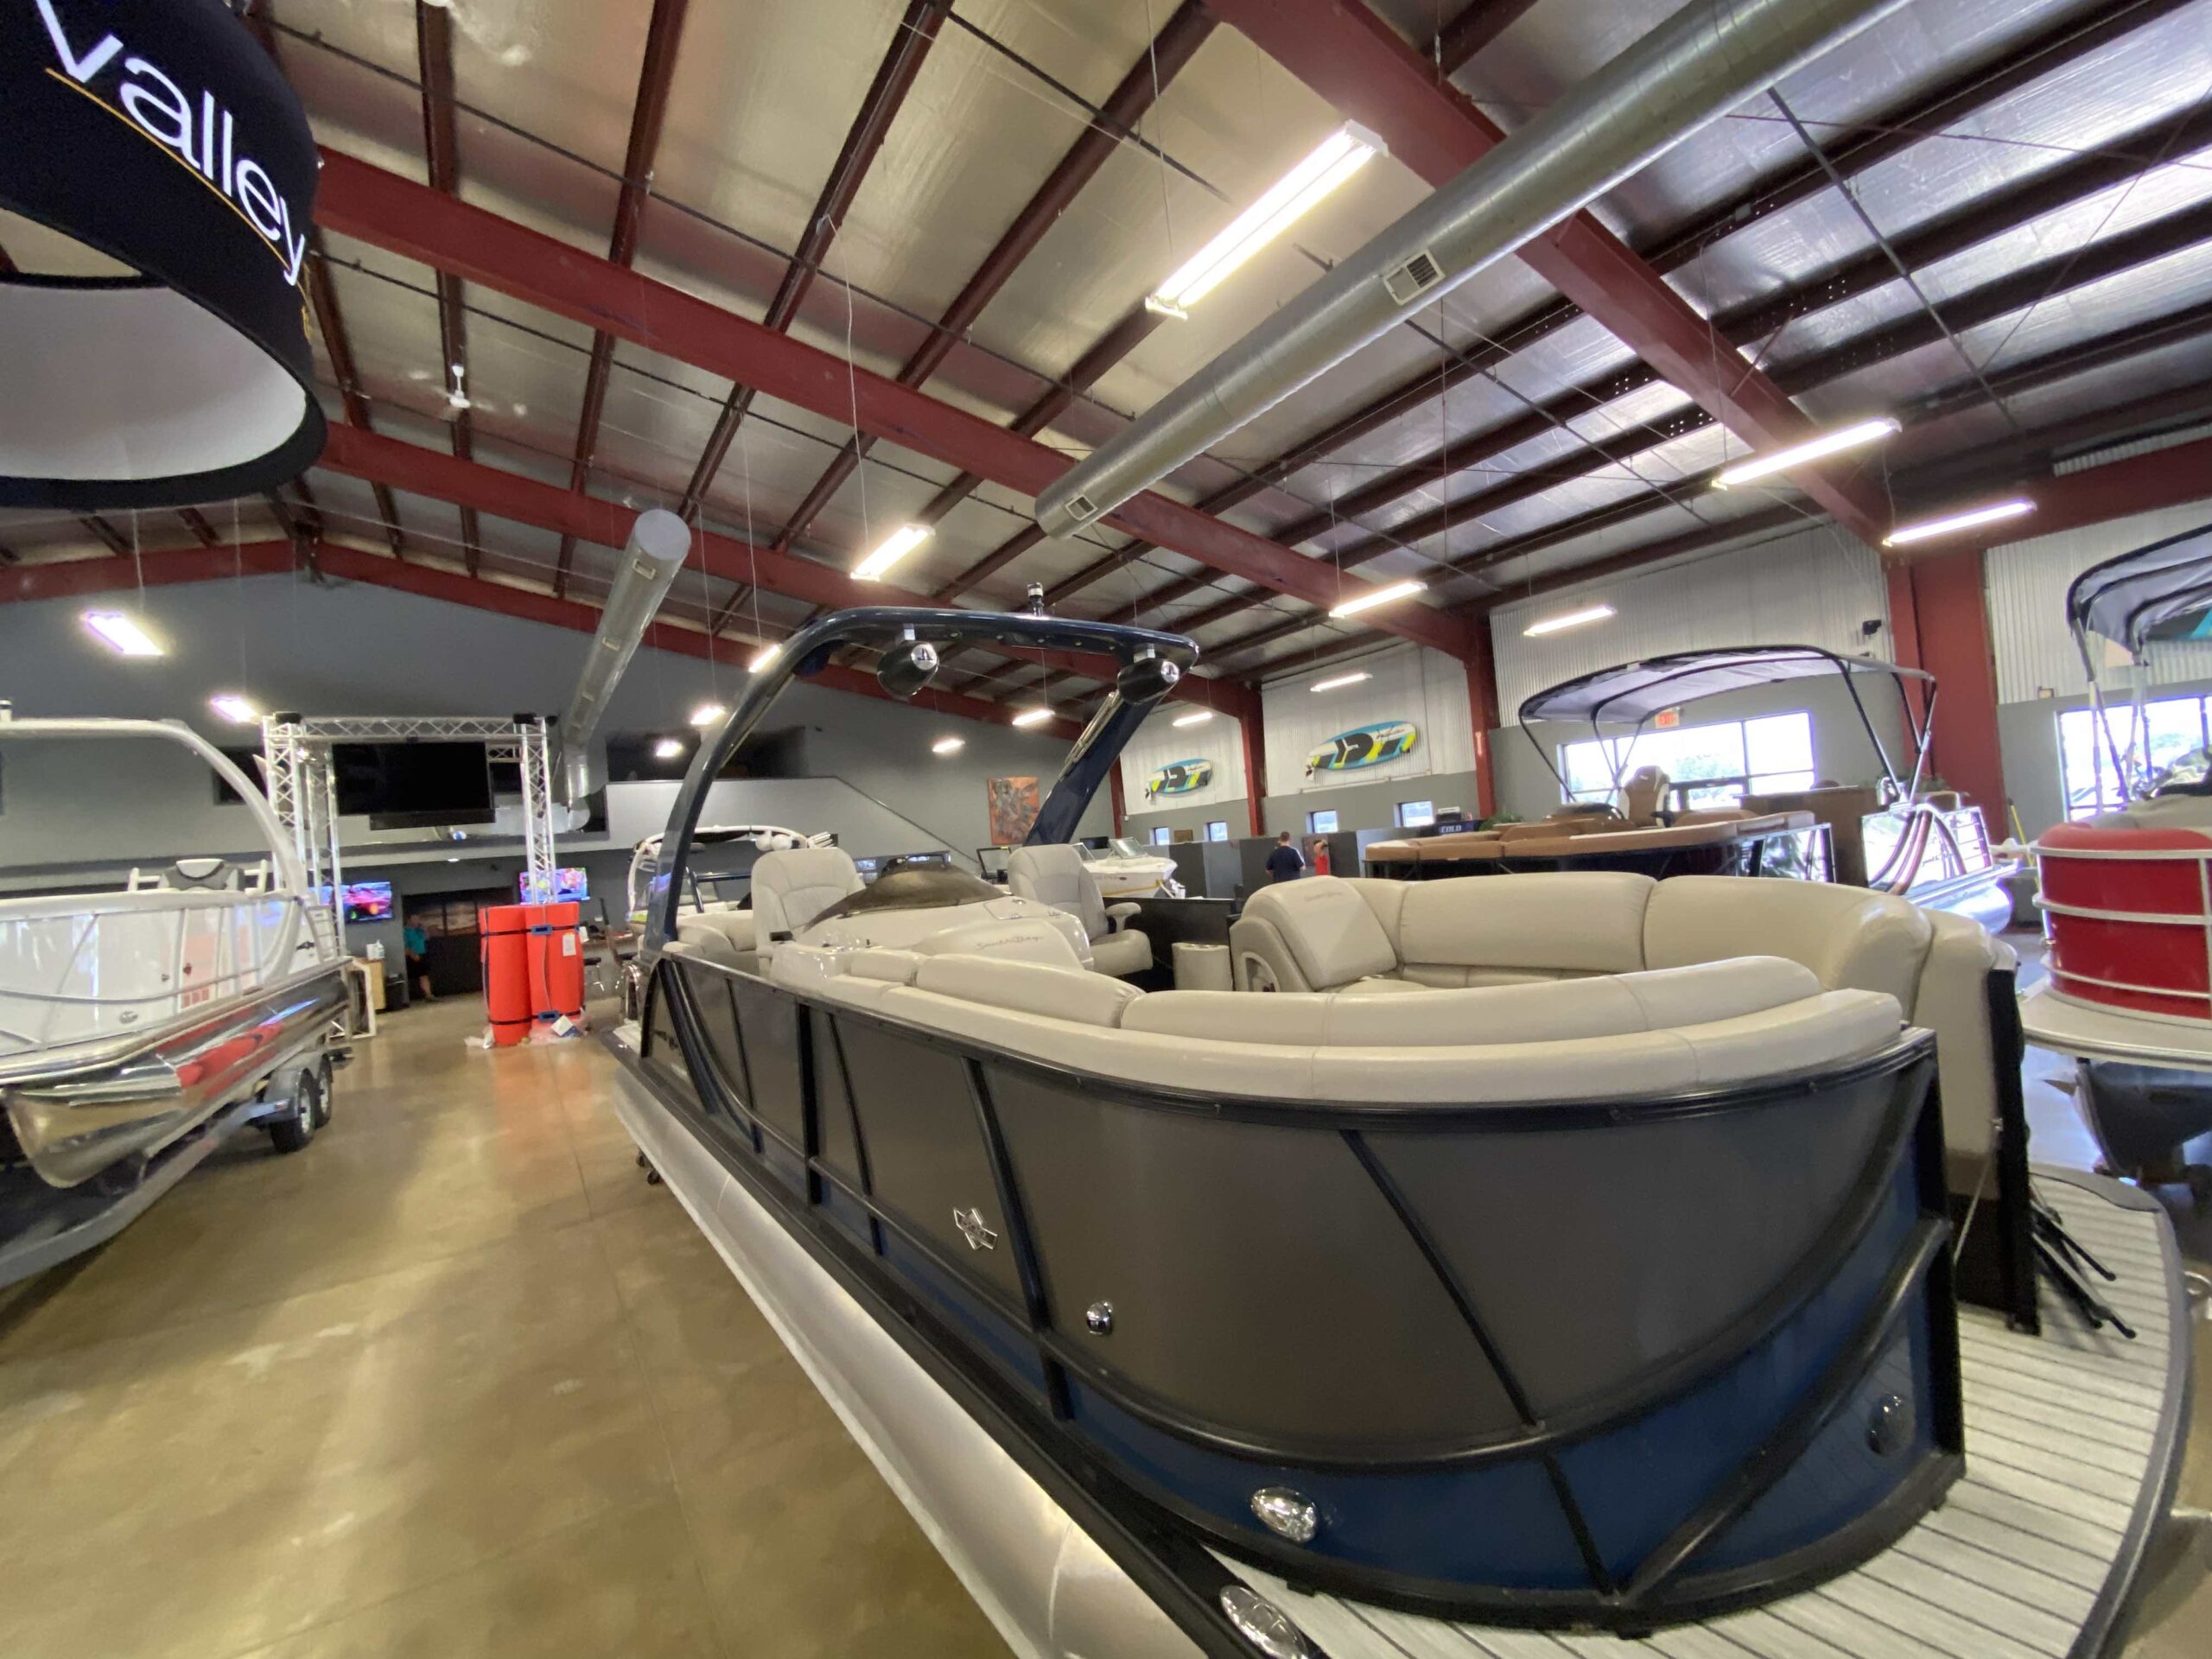 2020 South Bay Pontoon Boat For Sale at Valley Marine Showroom